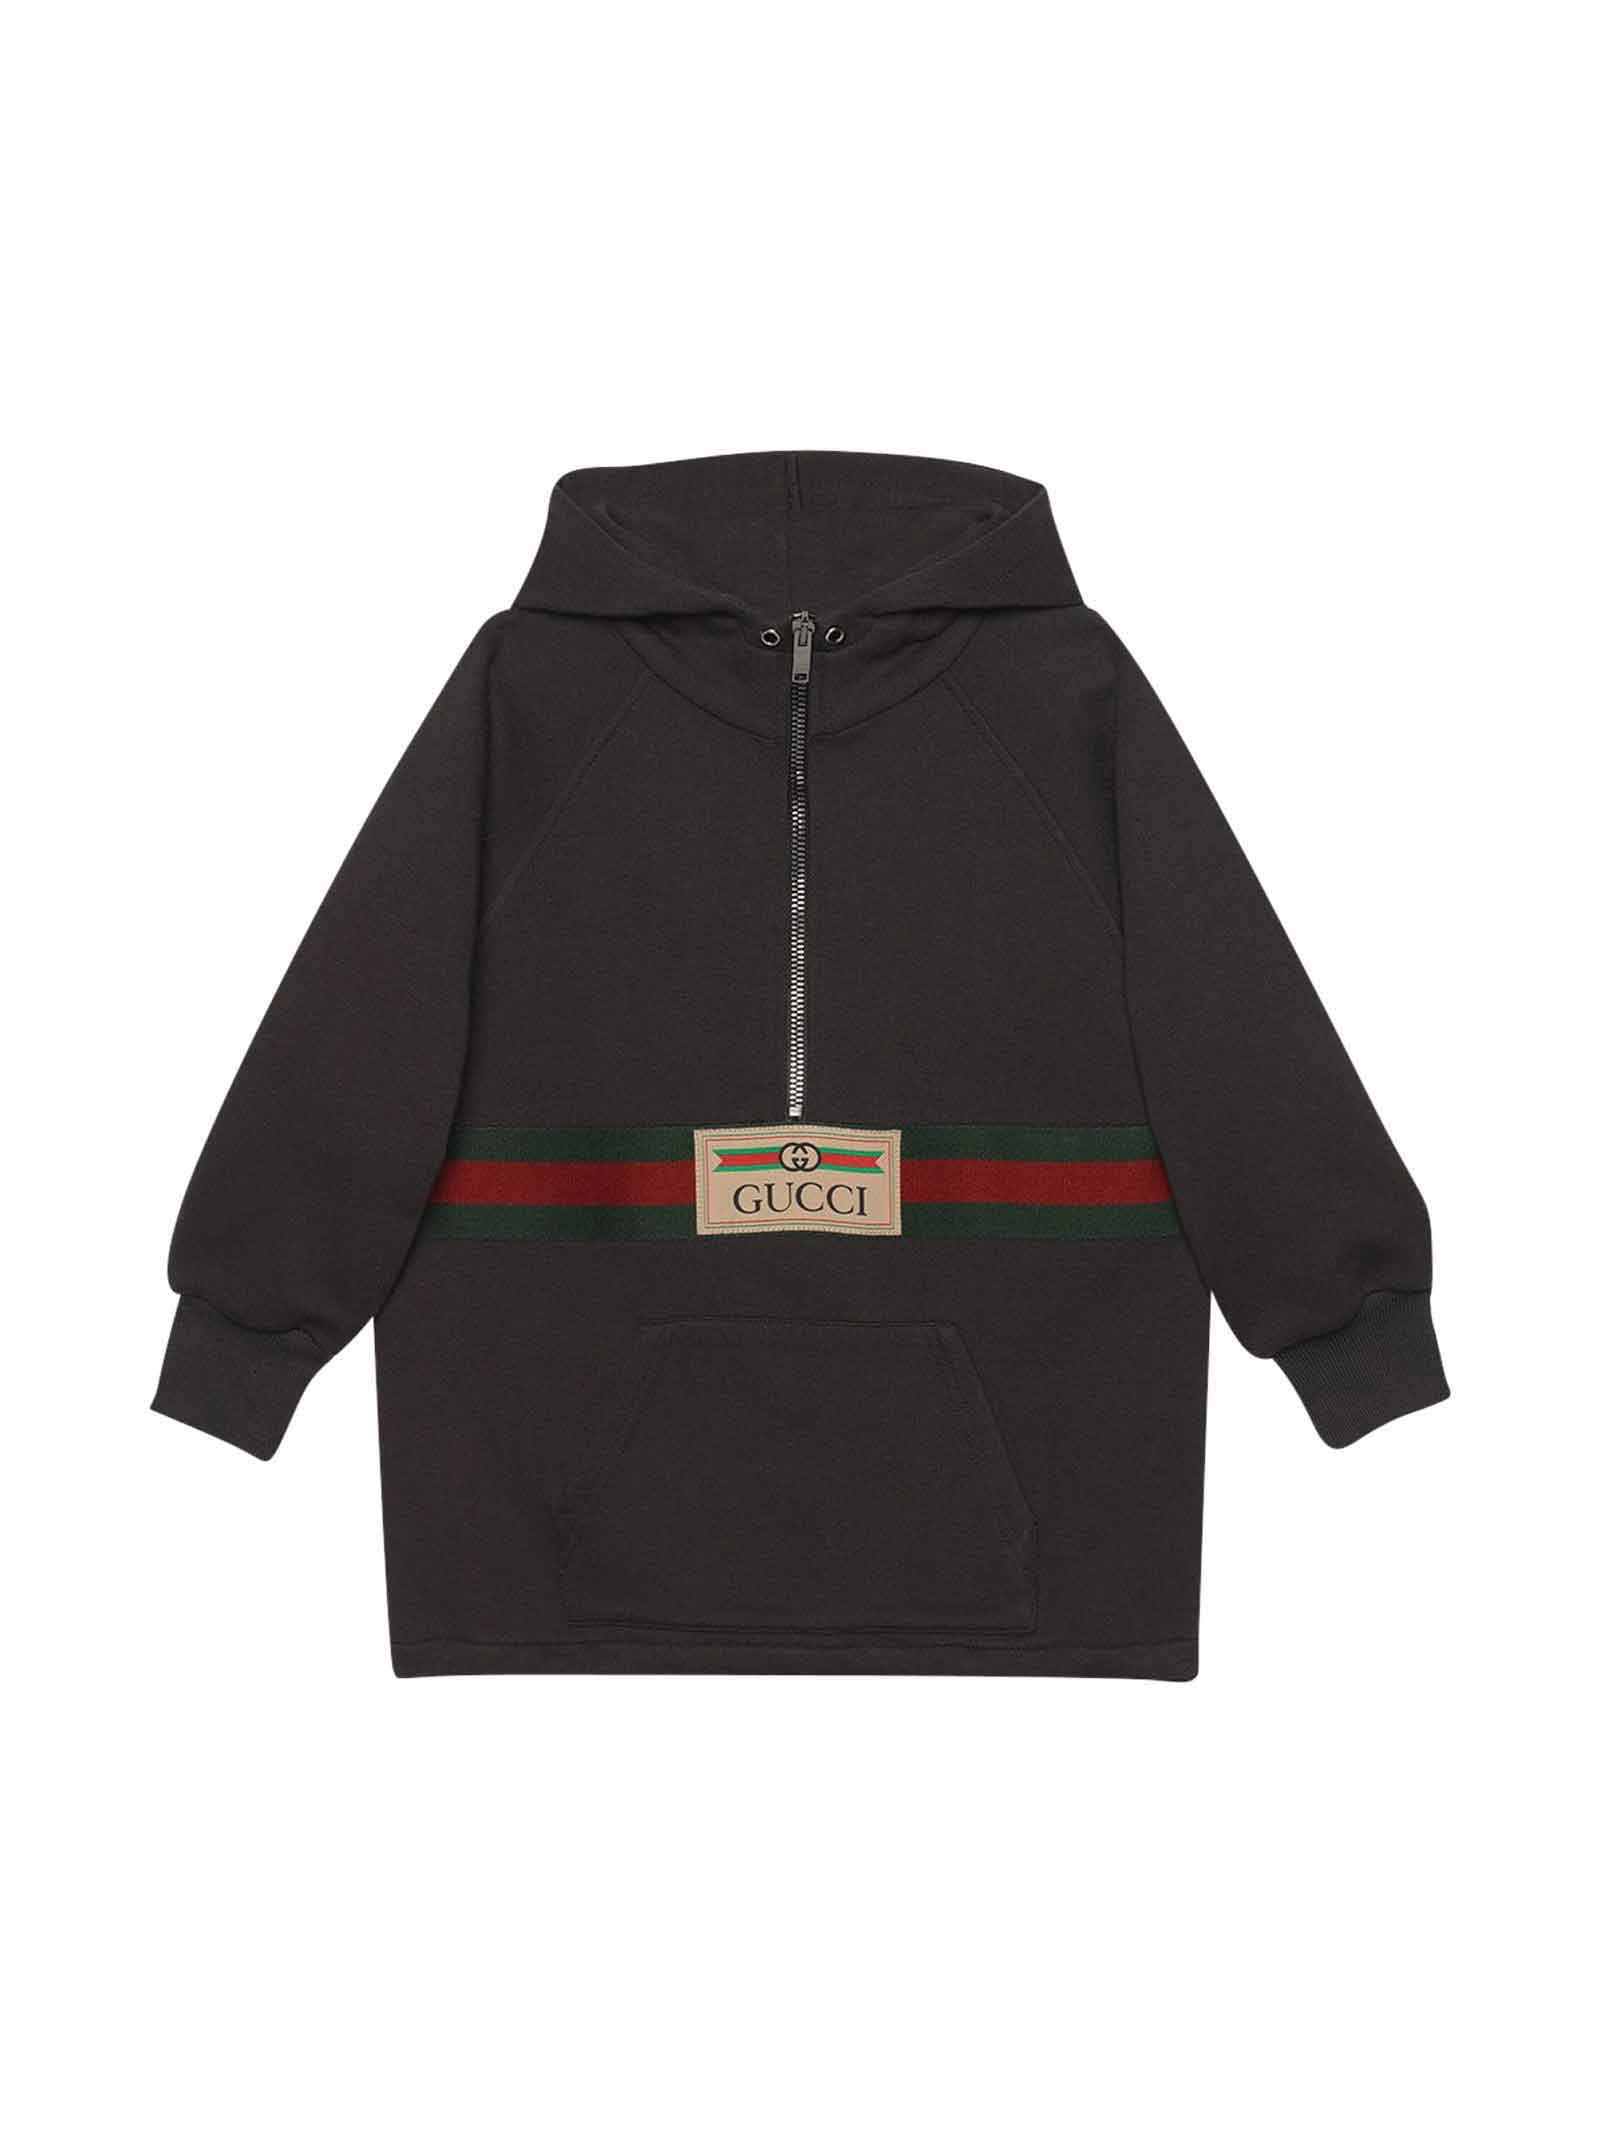 Gucci Black Sweatshirt With Frontal Zip And Pocket, Hood And Long Sleeves